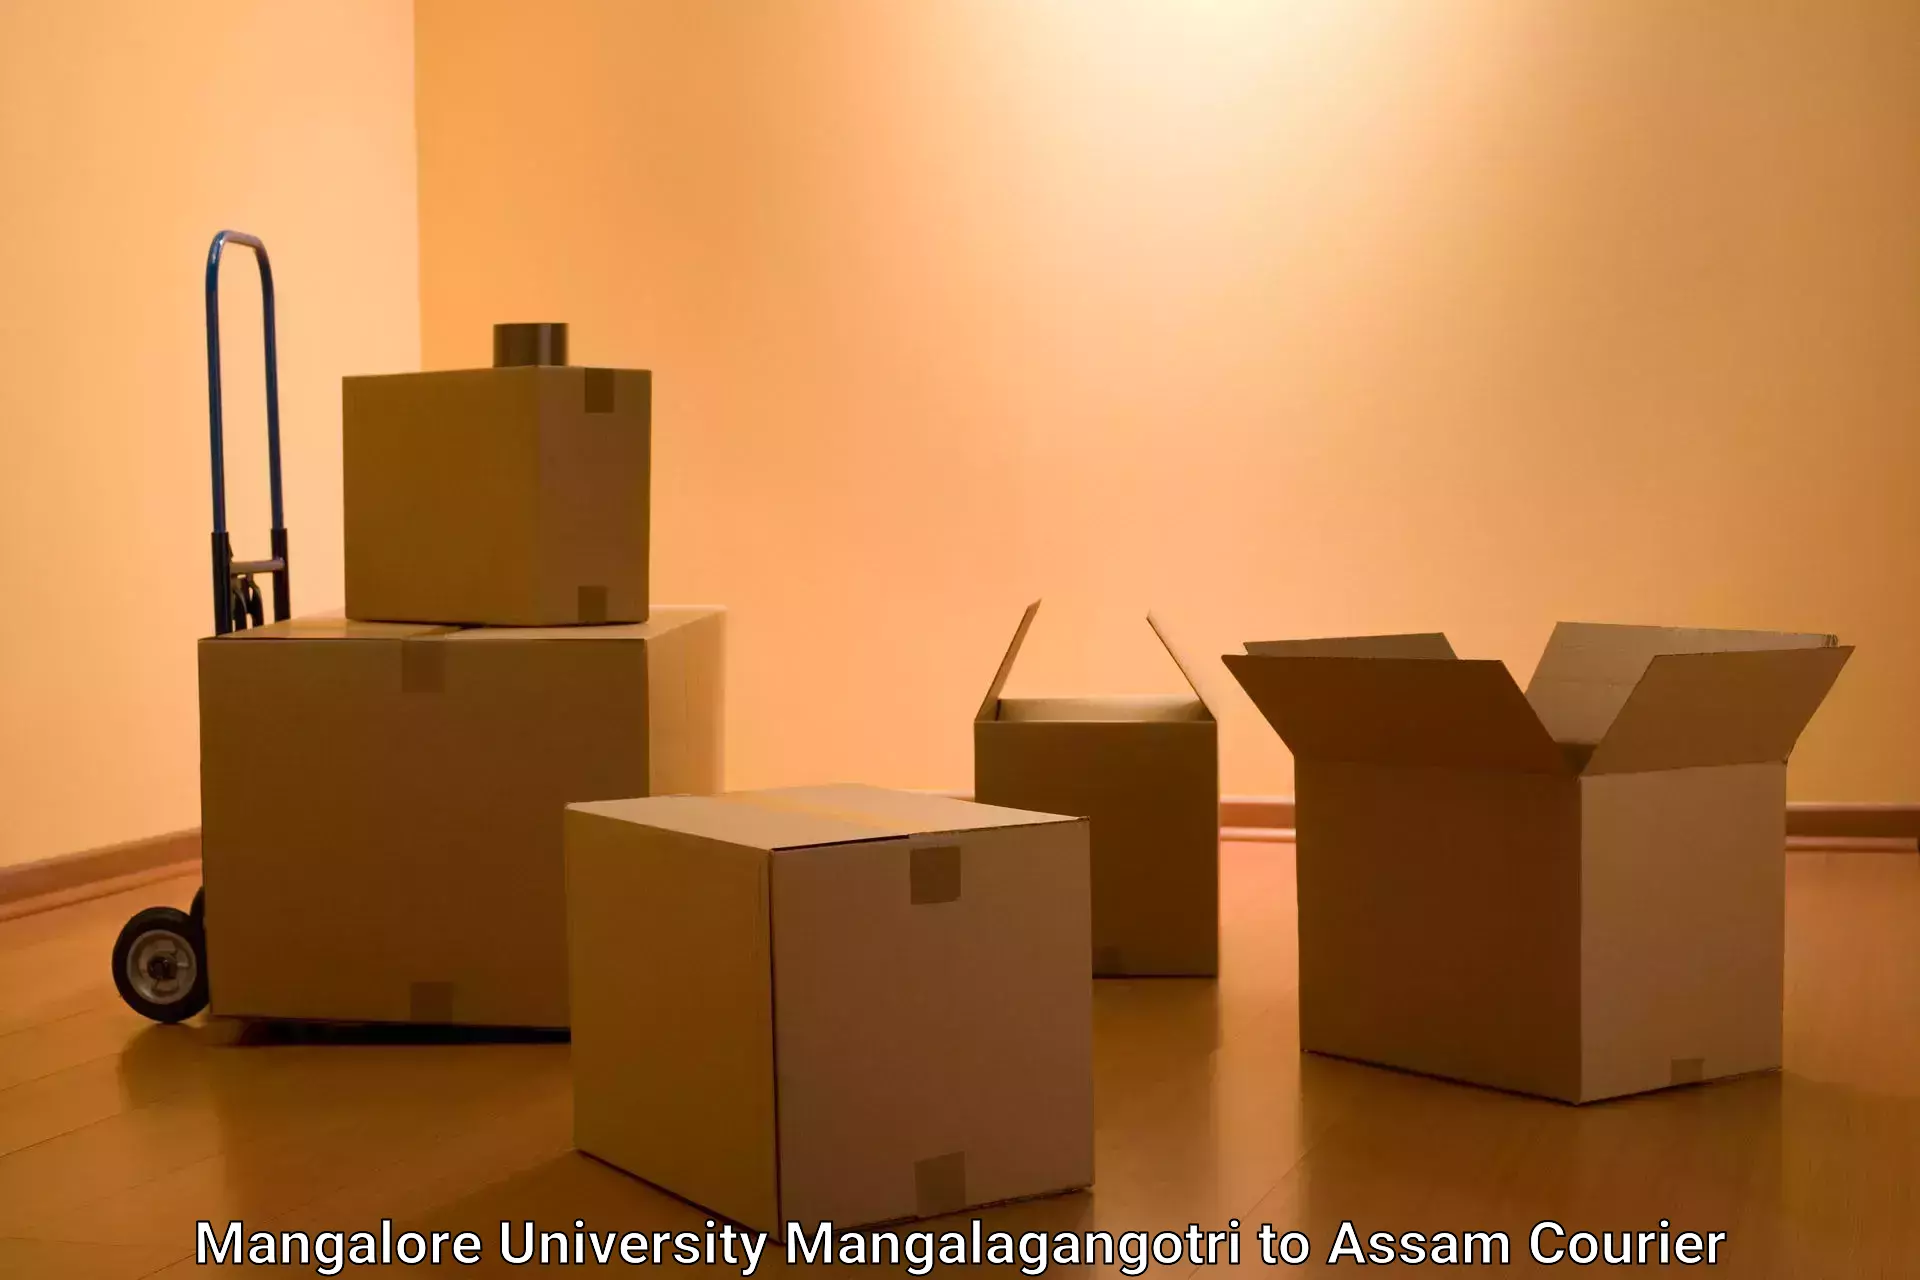 Custom courier packages in Mangalore University Mangalagangotri to Assam